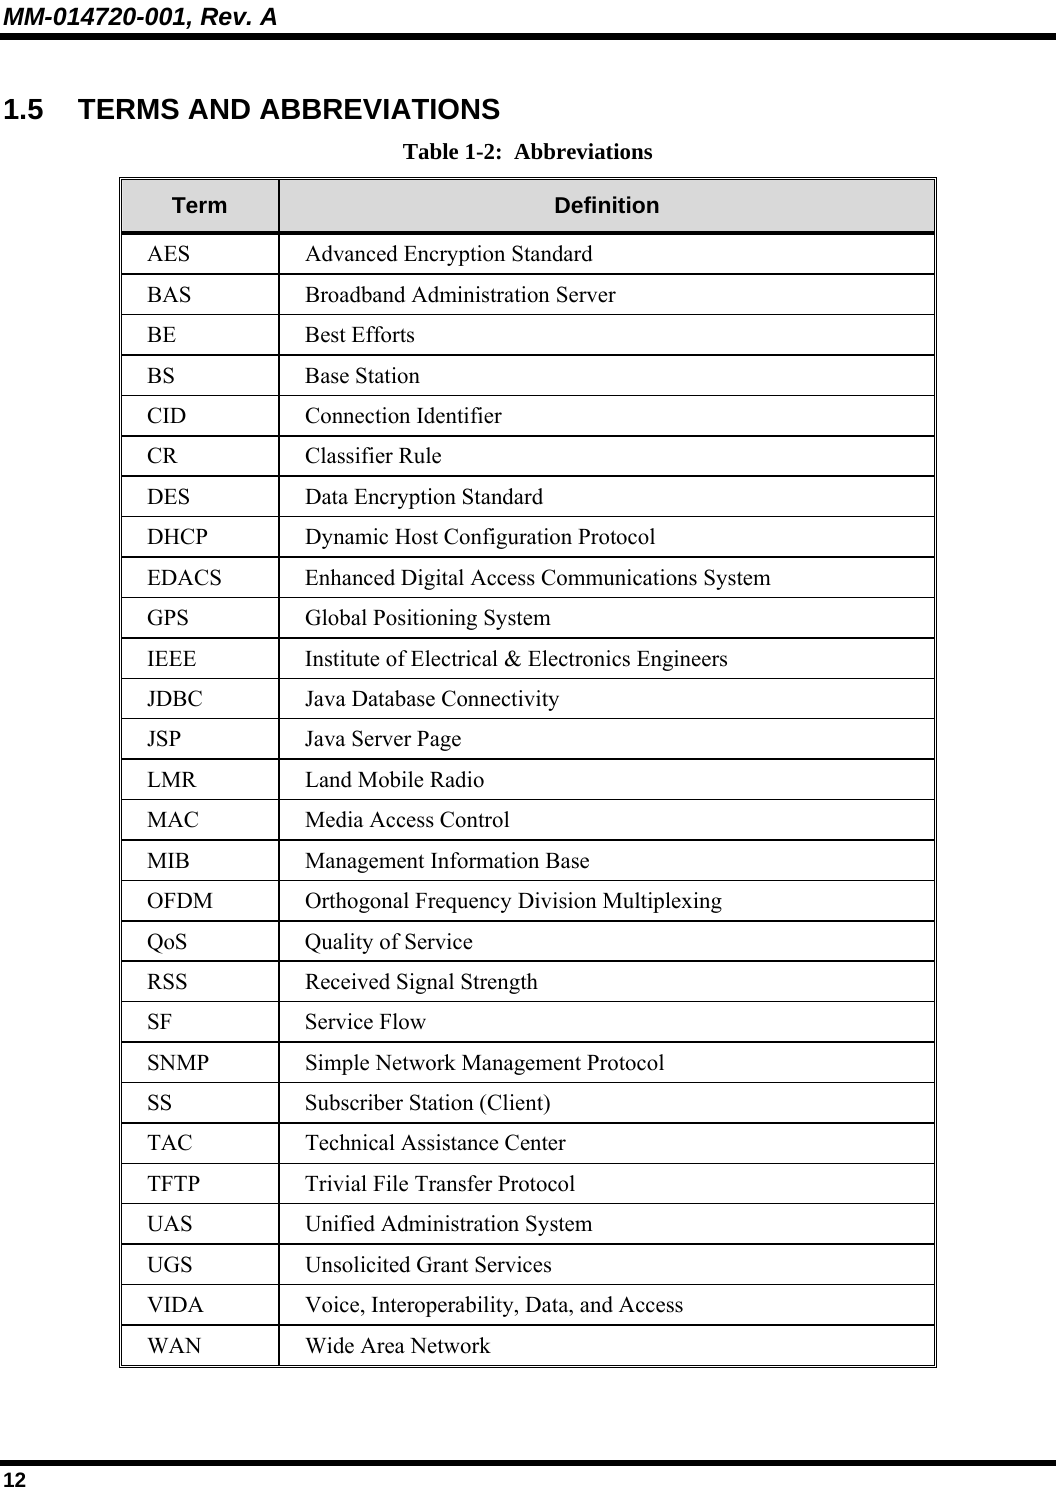 MM-014720-001, Rev. A 12 1.5 TERMS AND ABBREVIATIONS Table 1-2:  Abbreviations Term  Definition AES  Advanced Encryption Standard BAS  Broadband Administration Server BE Best Efforts BS Base Station CID Connection Identifier CR Classifier Rule DES  Data Encryption Standard DHCP  Dynamic Host Configuration Protocol EDACS  Enhanced Digital Access Communications System GPS  Global Positioning System IEEE  Institute of Electrical &amp; Electronics Engineers JDBC  Java Database Connectivity JSP  Java Server Page LMR Land Mobile Radio MAC  Media Access Control MIB Management Information Base OFDM  Orthogonal Frequency Division Multiplexing QoS Quality of Service RSS  Received Signal Strength SF Service Flow SNMP Simple Network Management Protocol SS  Subscriber Station (Client) TAC  Technical Assistance Center TFTP  Trivial File Transfer Protocol UAS  Unified Administration System UGS  Unsolicited Grant Services VIDA  Voice, Interoperability, Data, and Access WAN  Wide Area Network   